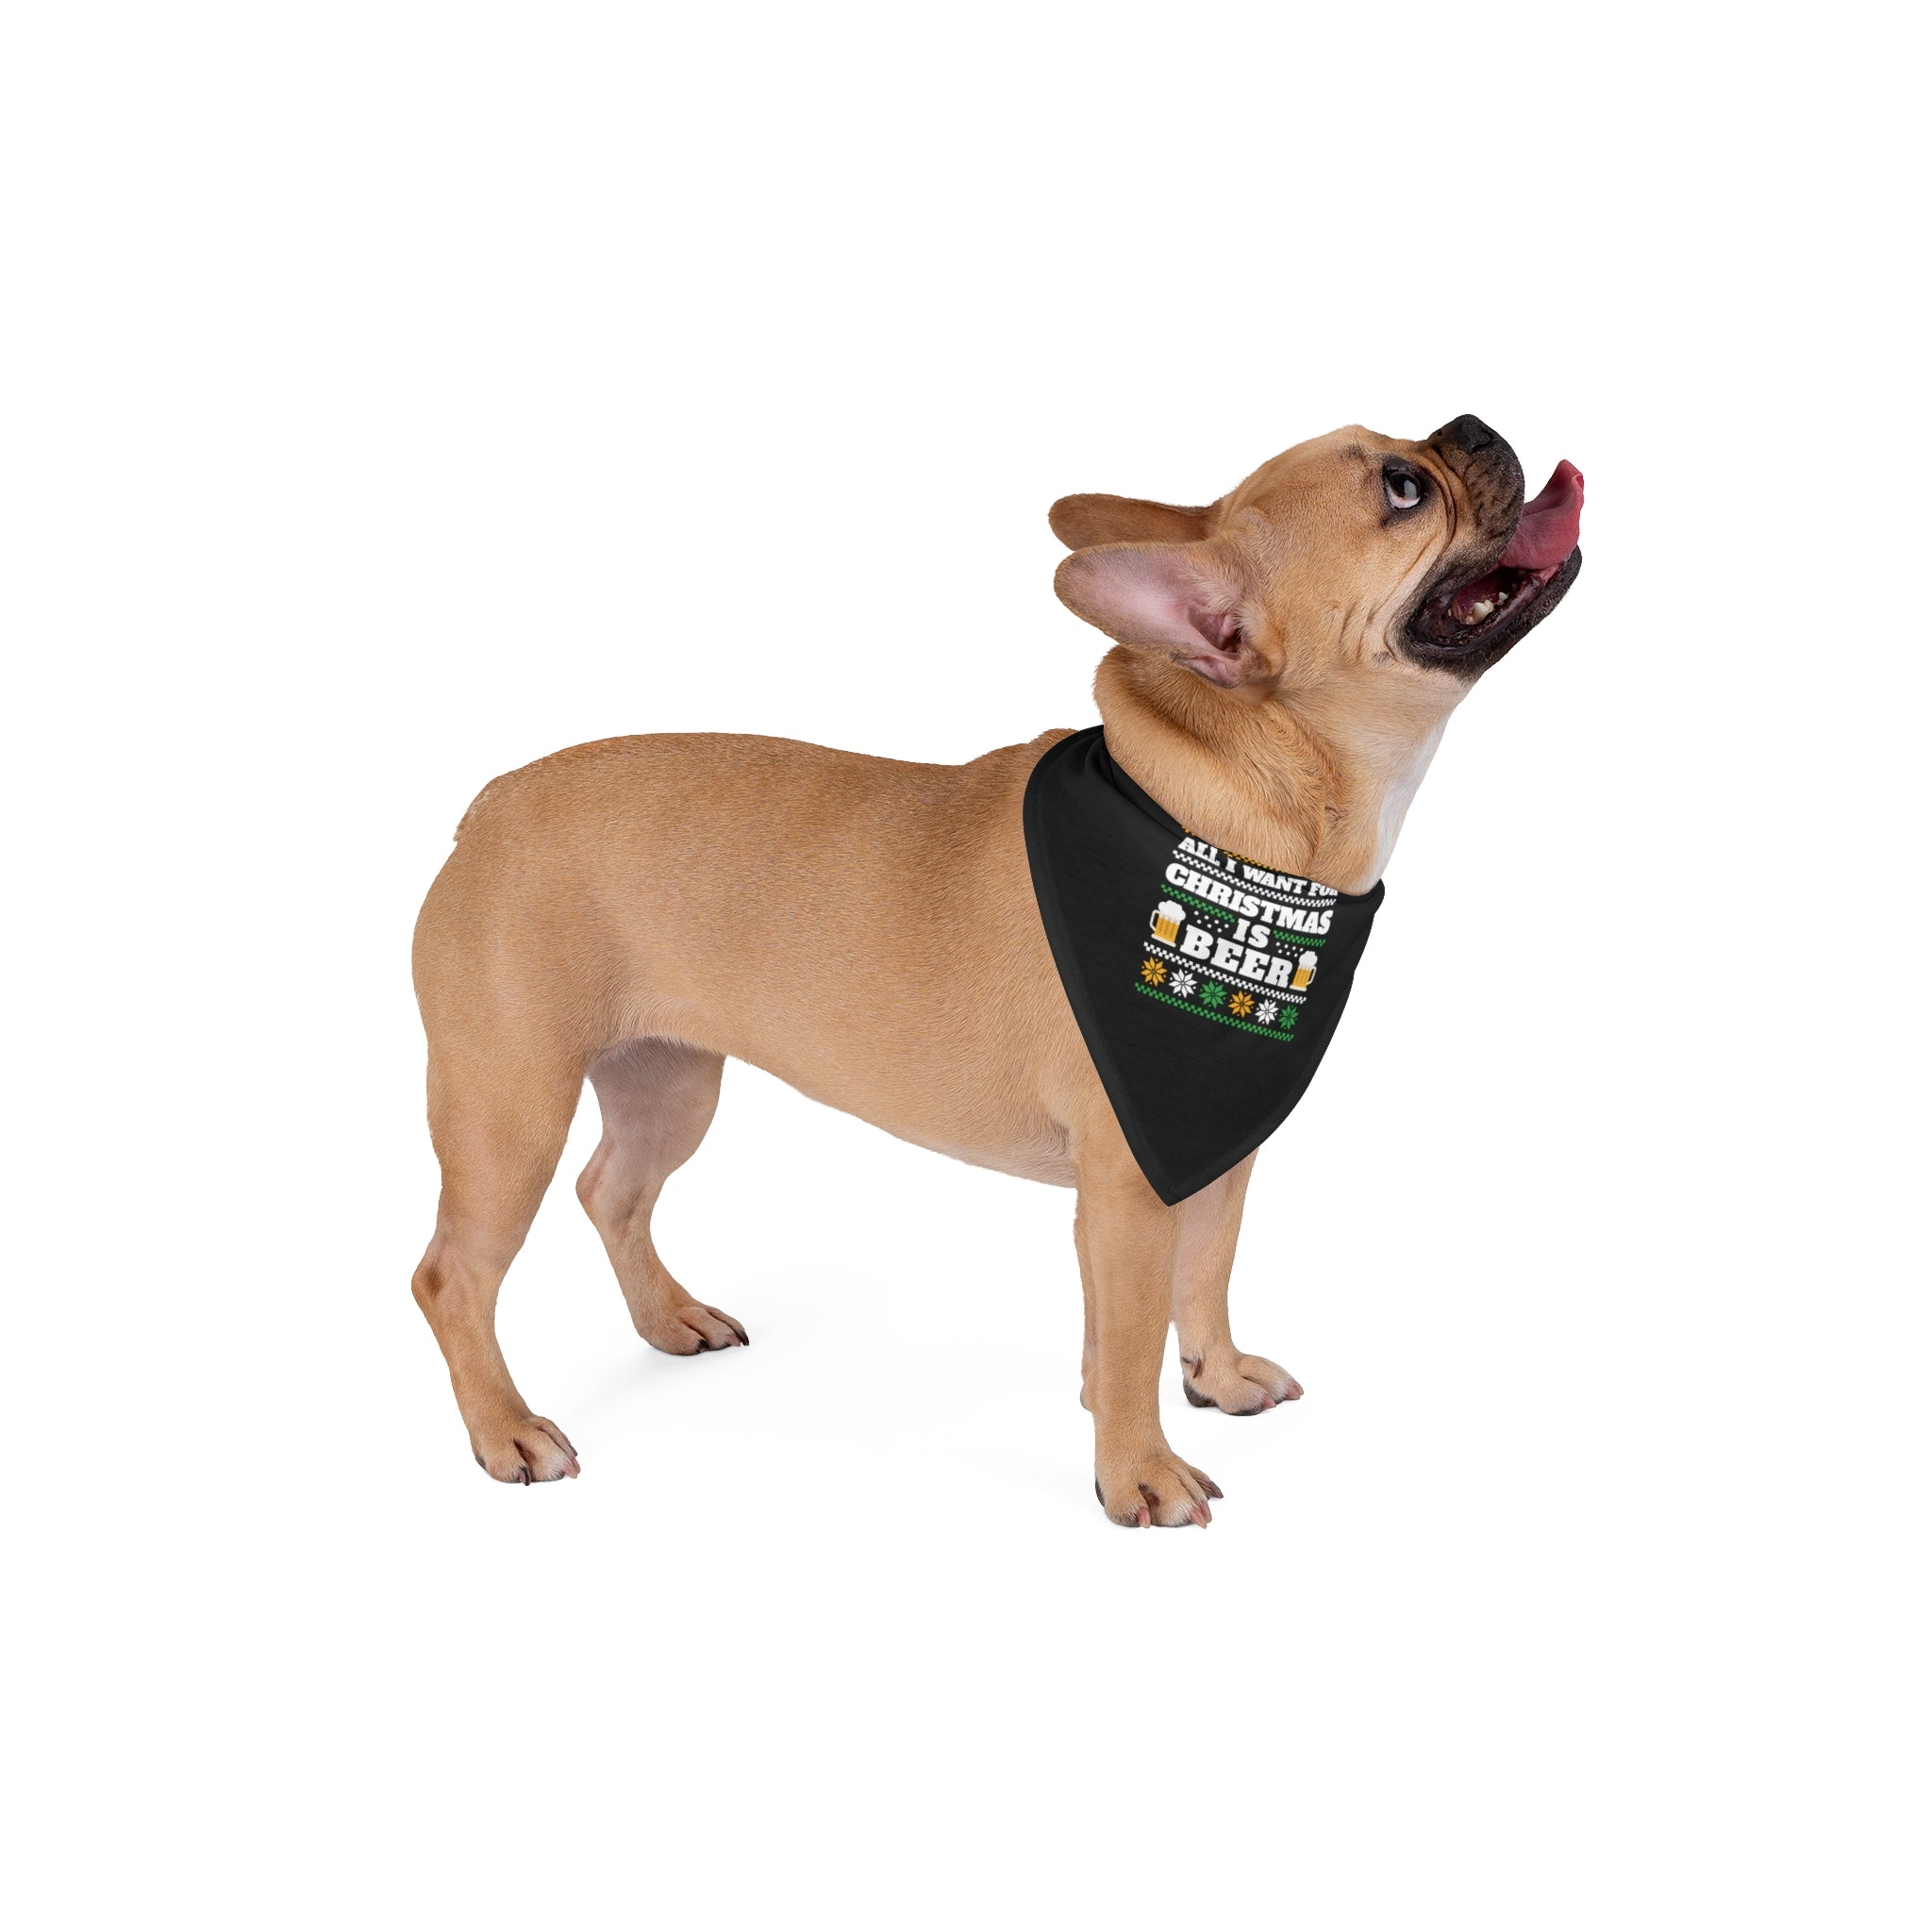 A tan-colored French Bulldog stands looking upward, wearing a black Beer Ugly Sweater - Pet Bandana made from soft-spun polyester, adorned with text and colorful graphics.